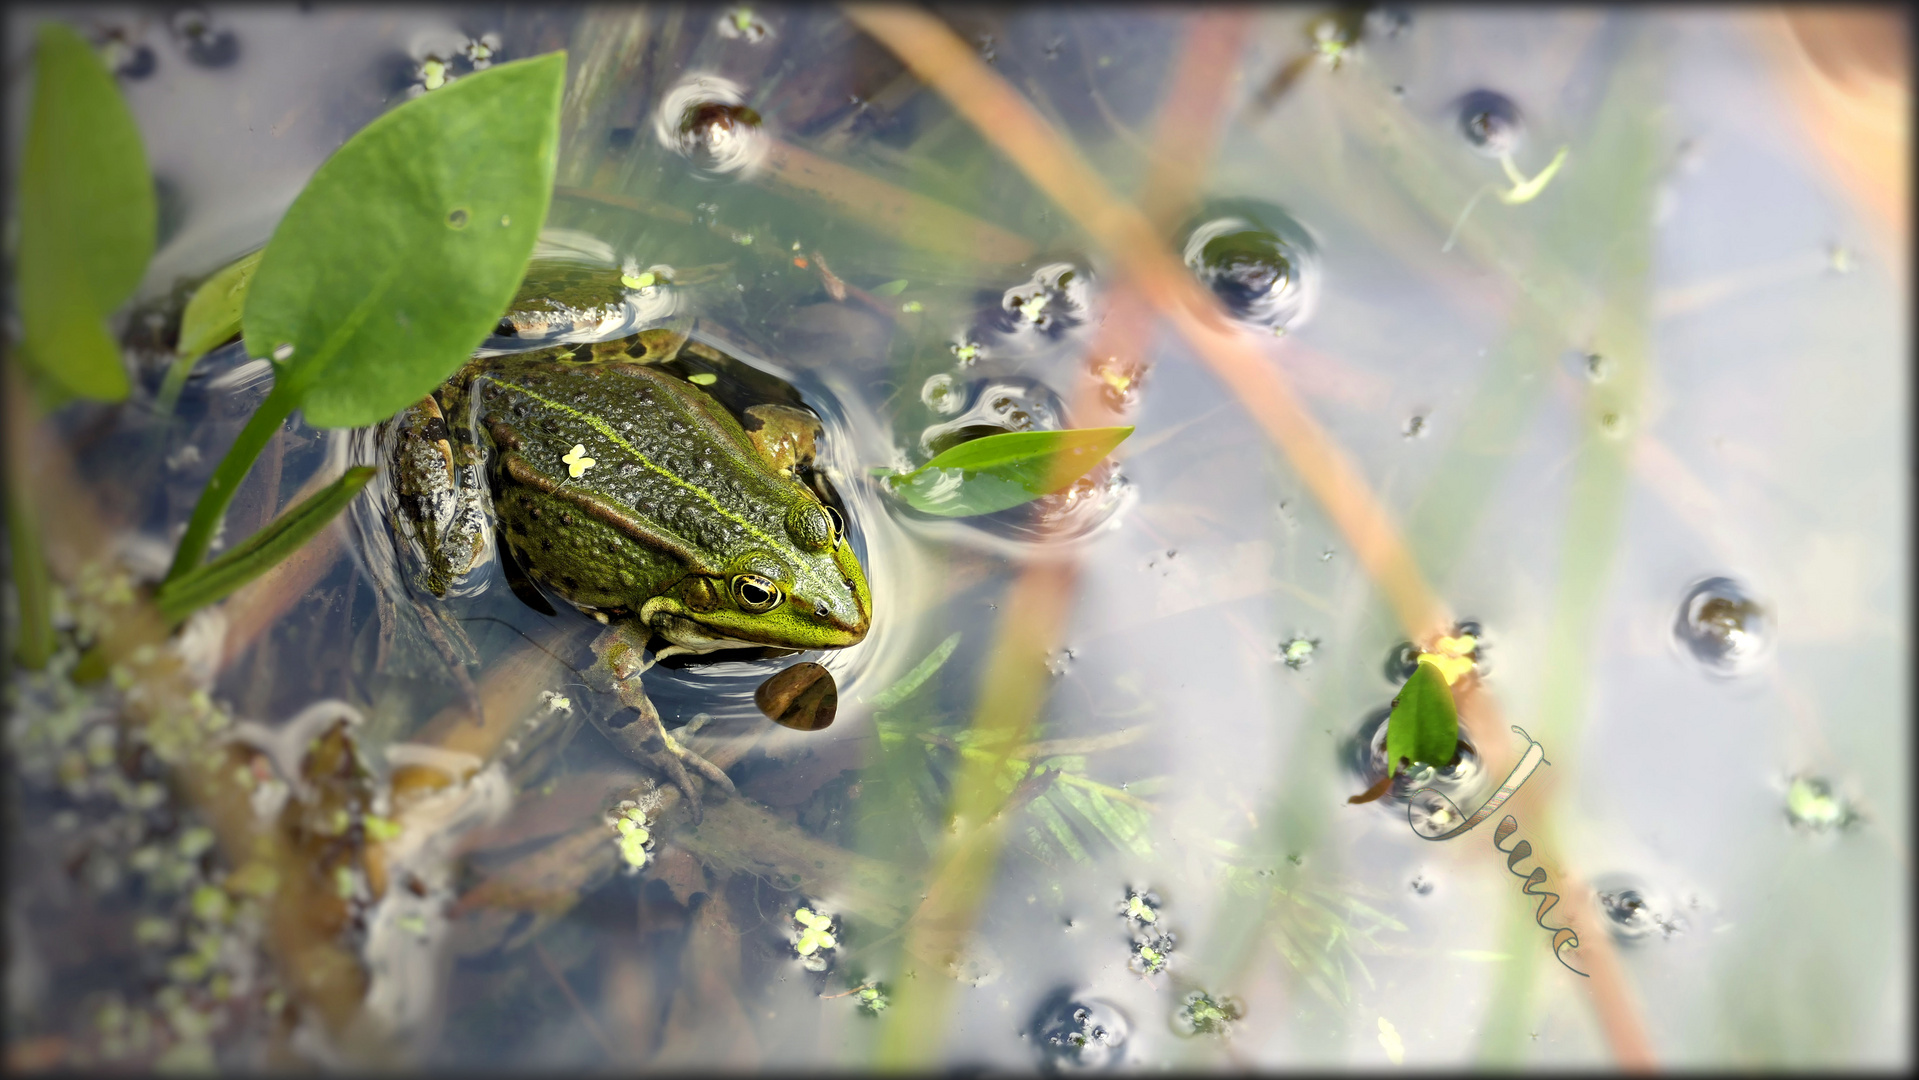 ... frog is basking in the pond